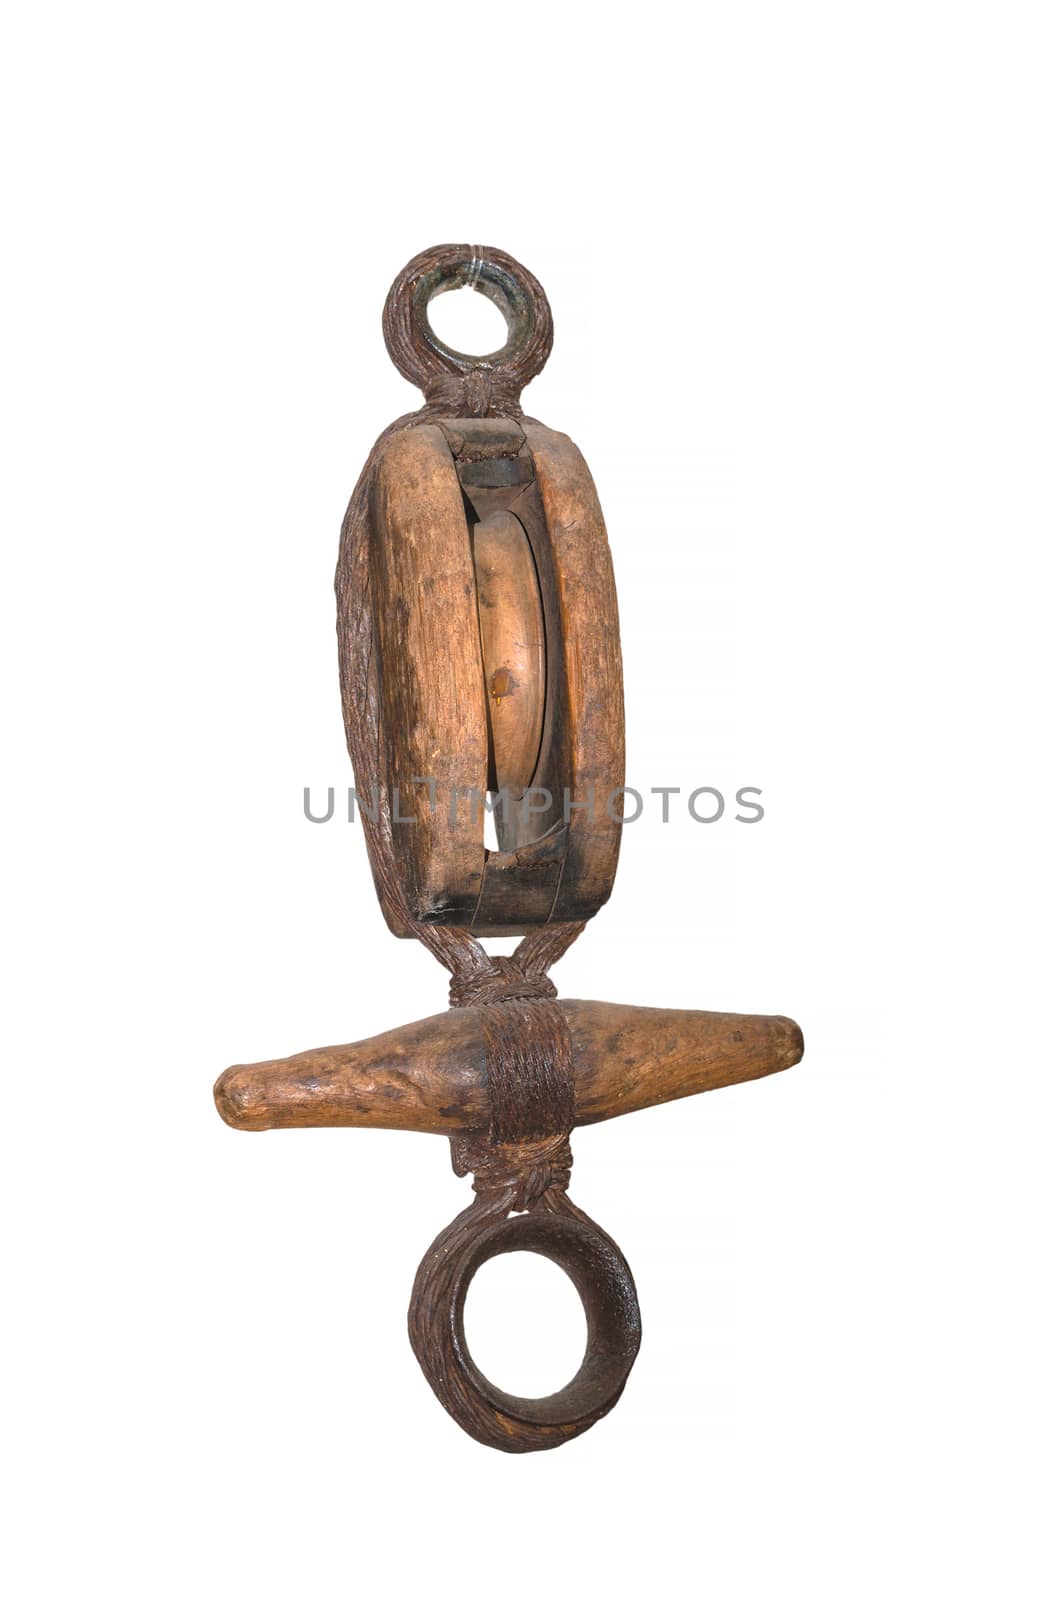 Old antique wooden pulley with pulley.